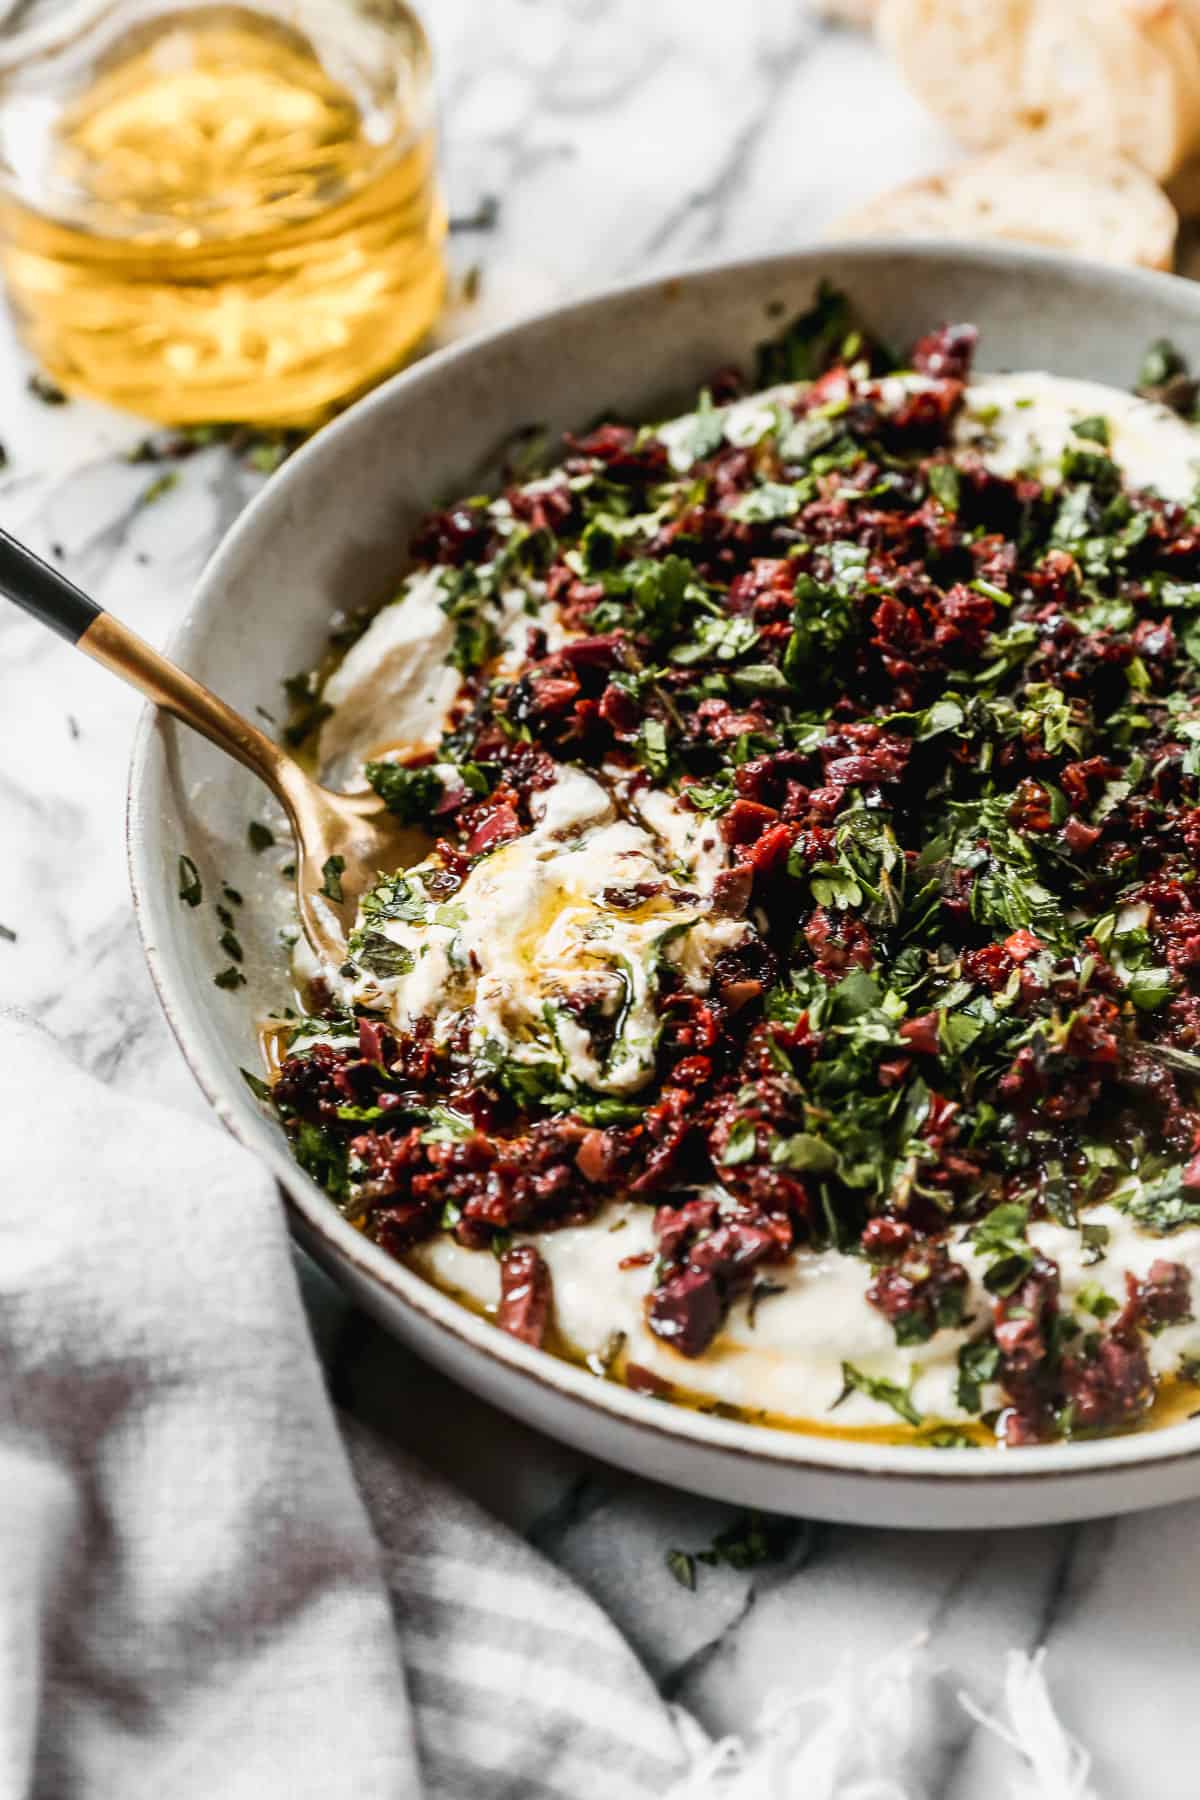 A Whipped Goat Cheese Dip, topped with chopped sun-dried tomatoes and herbs, ready to be served with crackers and pitas.